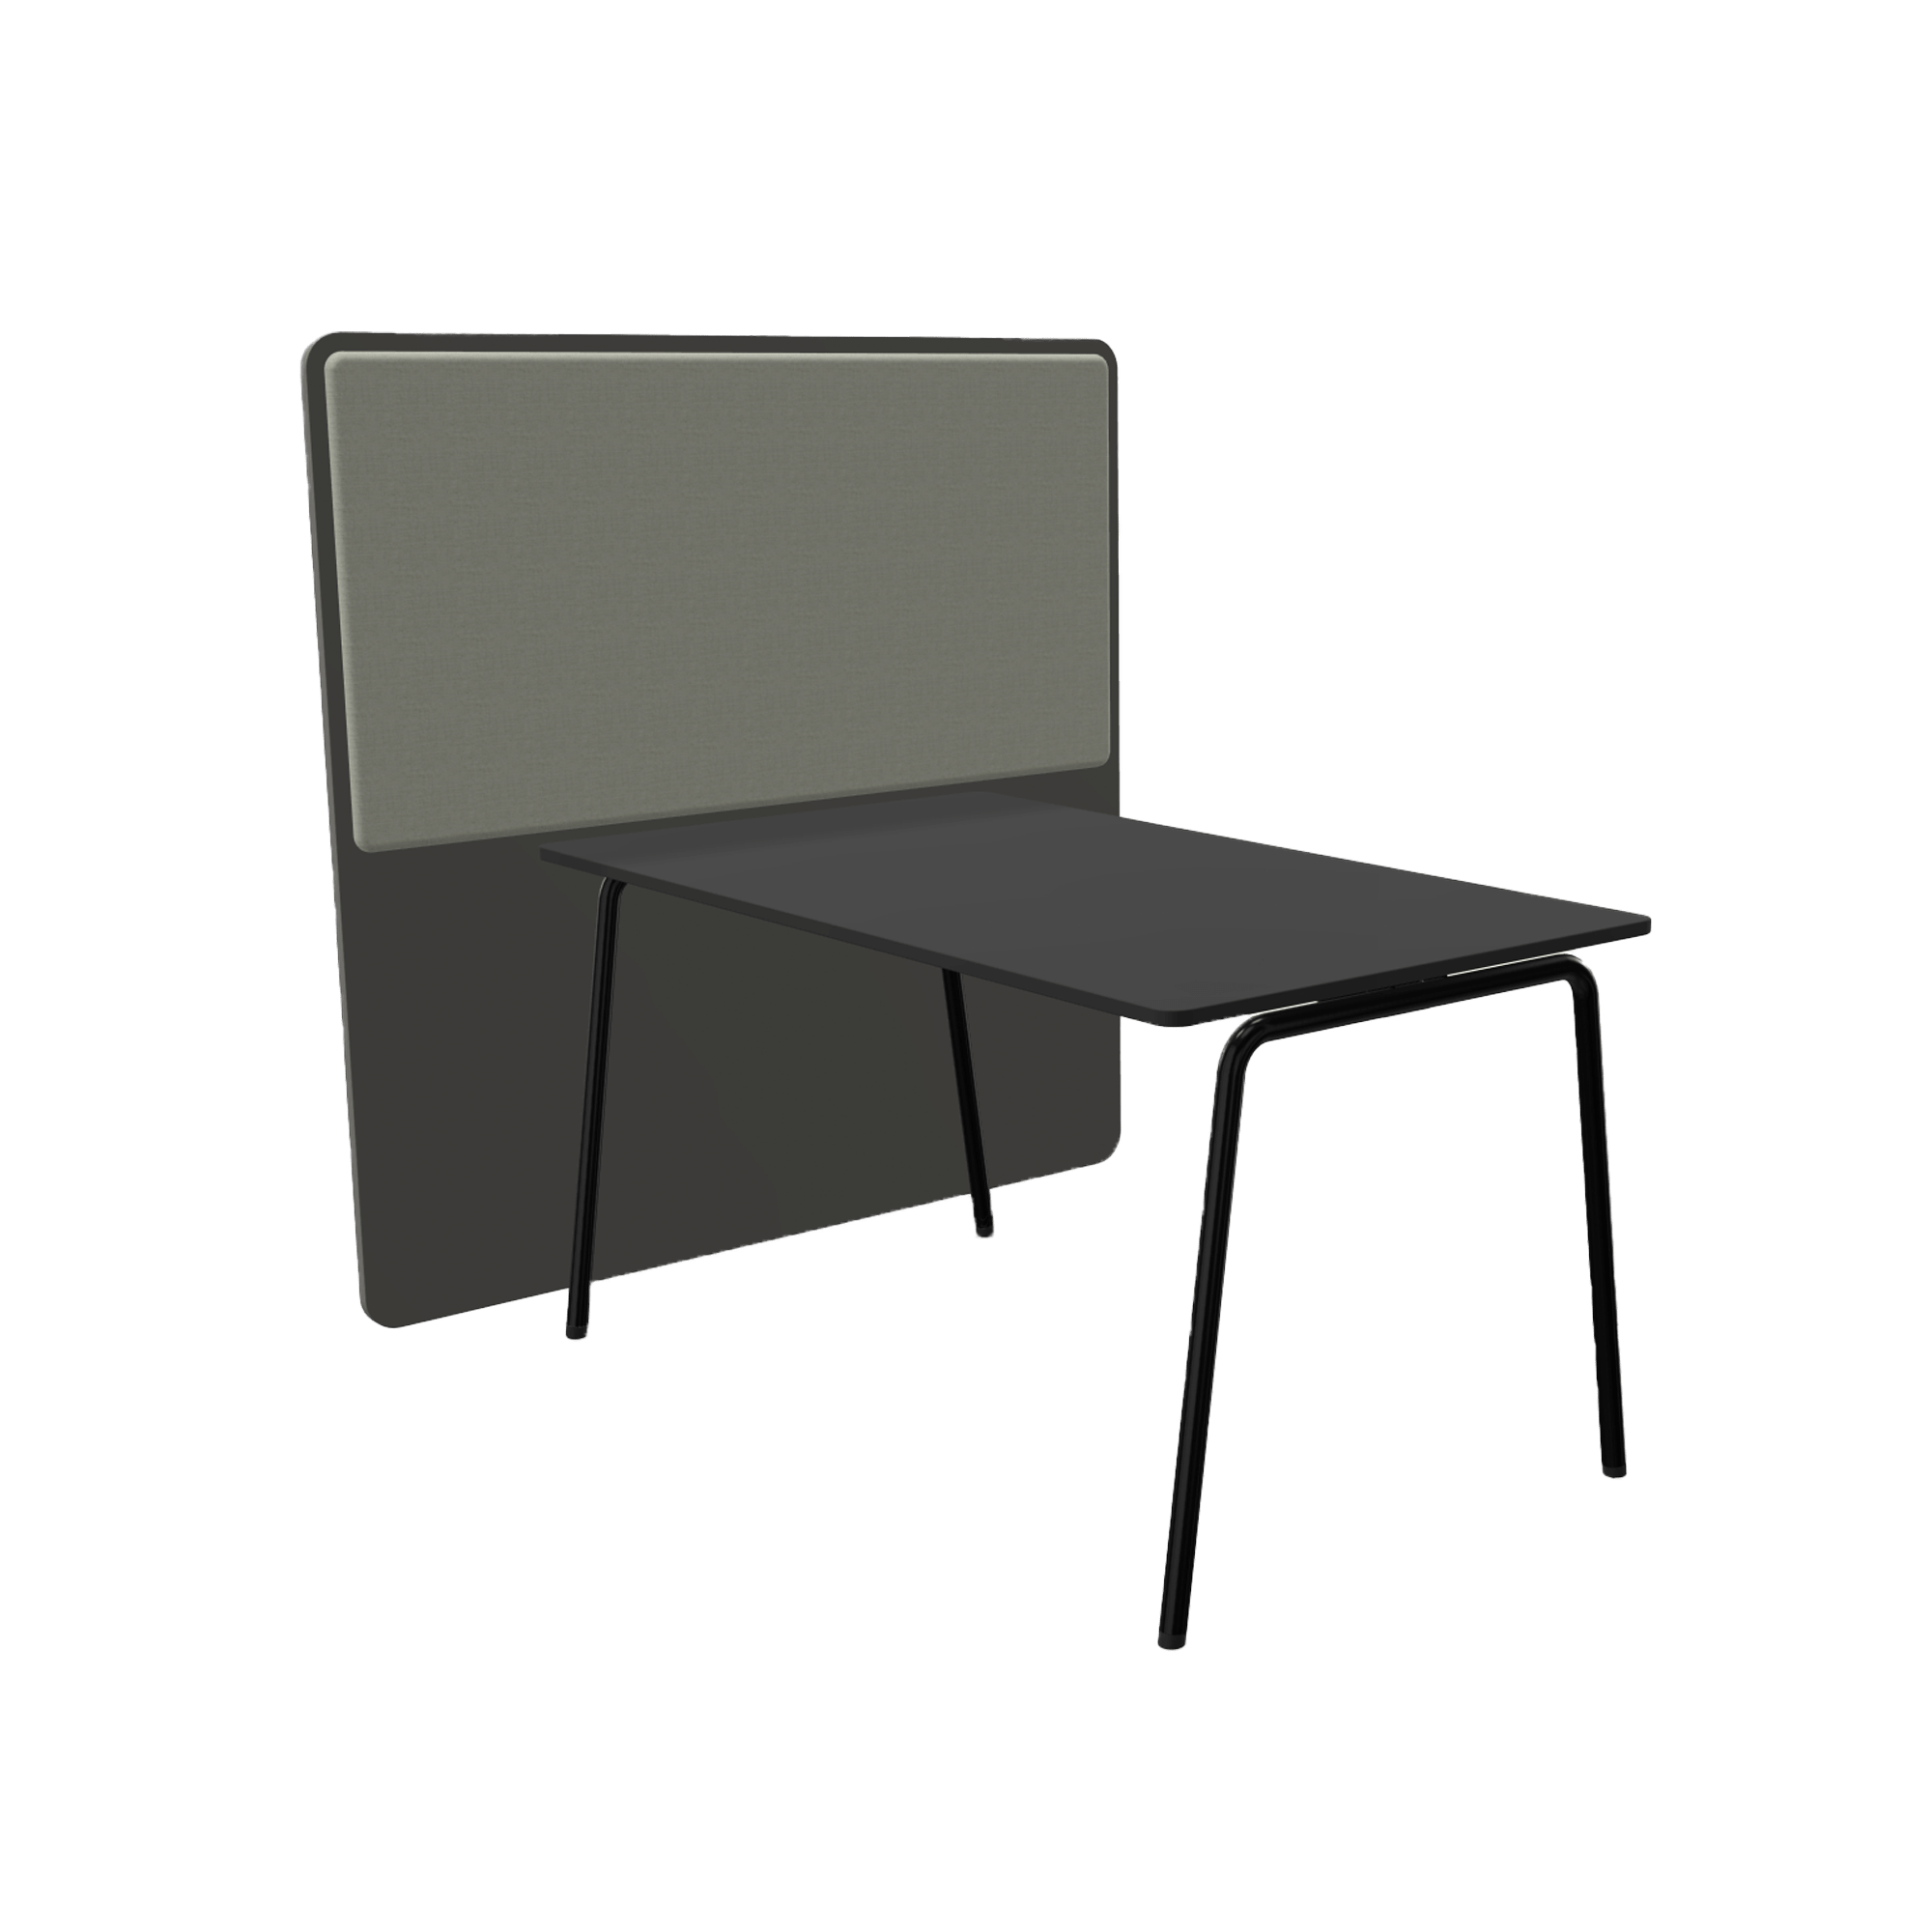 A black table with black legs and a black office screen divider attached to one side with an acoustic panel on it.